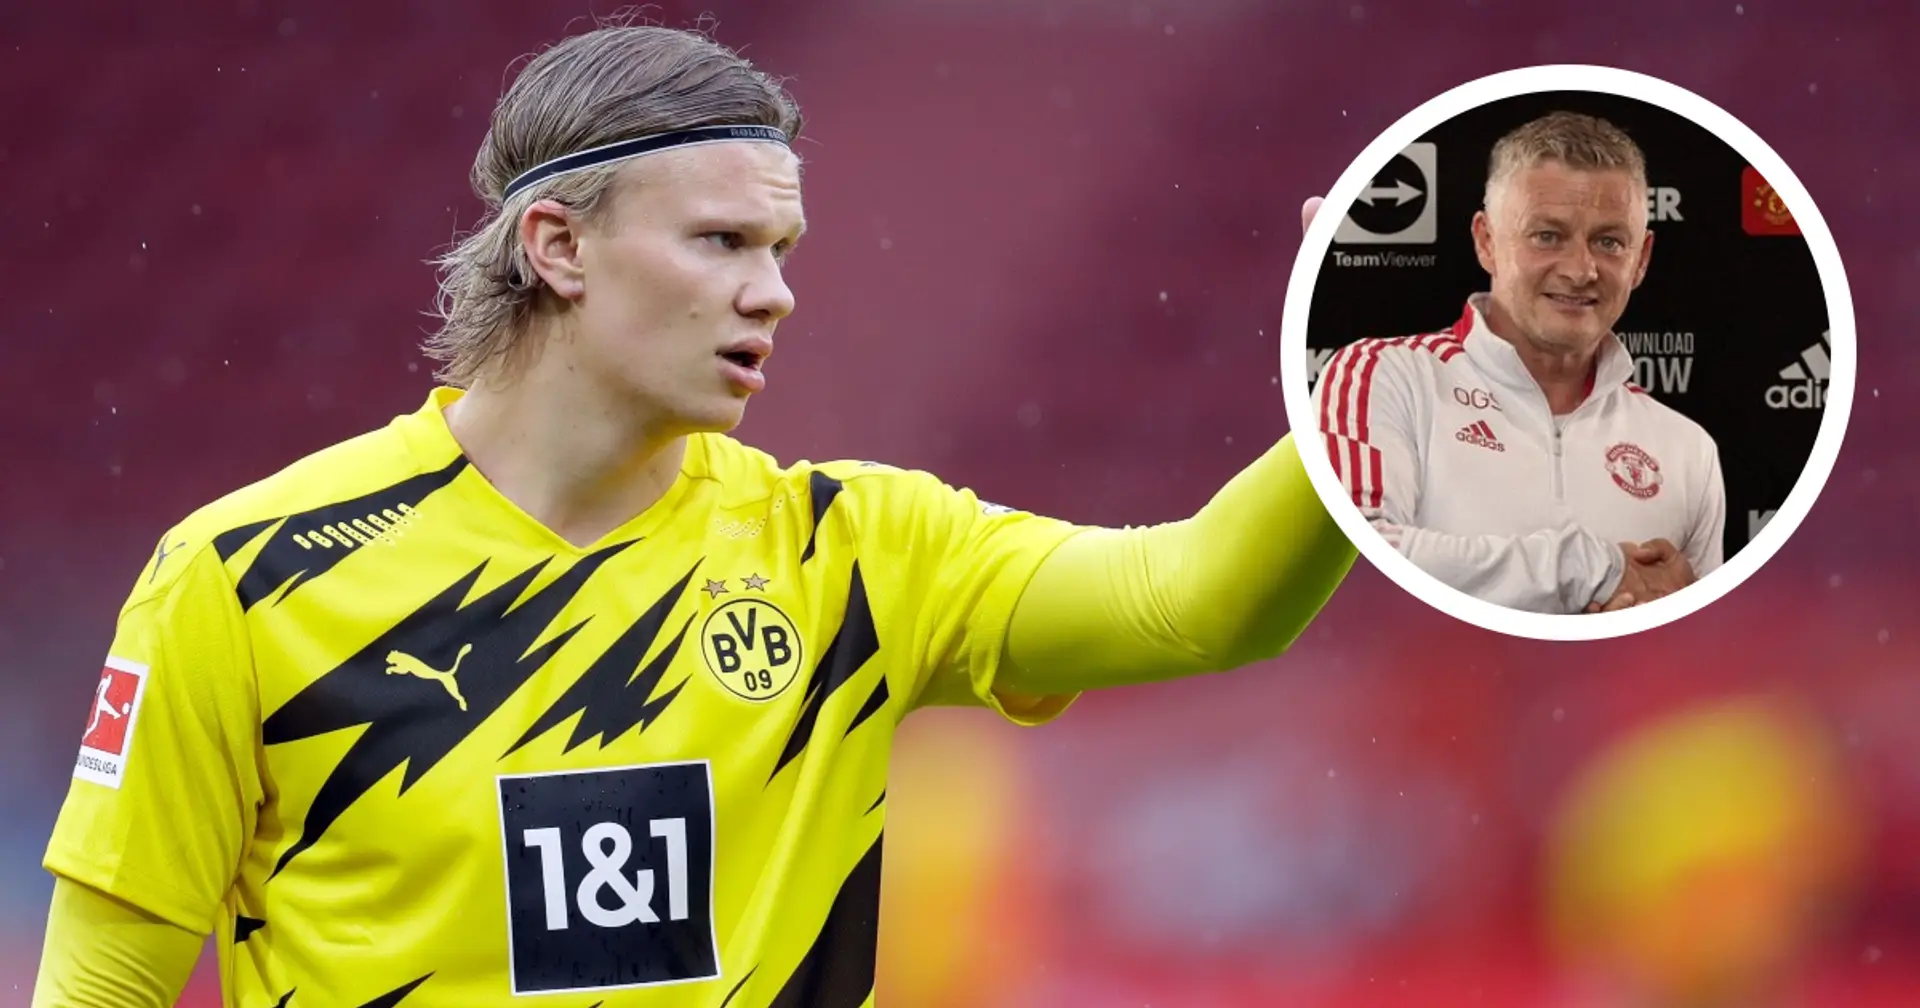 Man United believe Solskjaer's new deal gives them 'an edge' in Haaland pursuit (reliability: 4 stars)